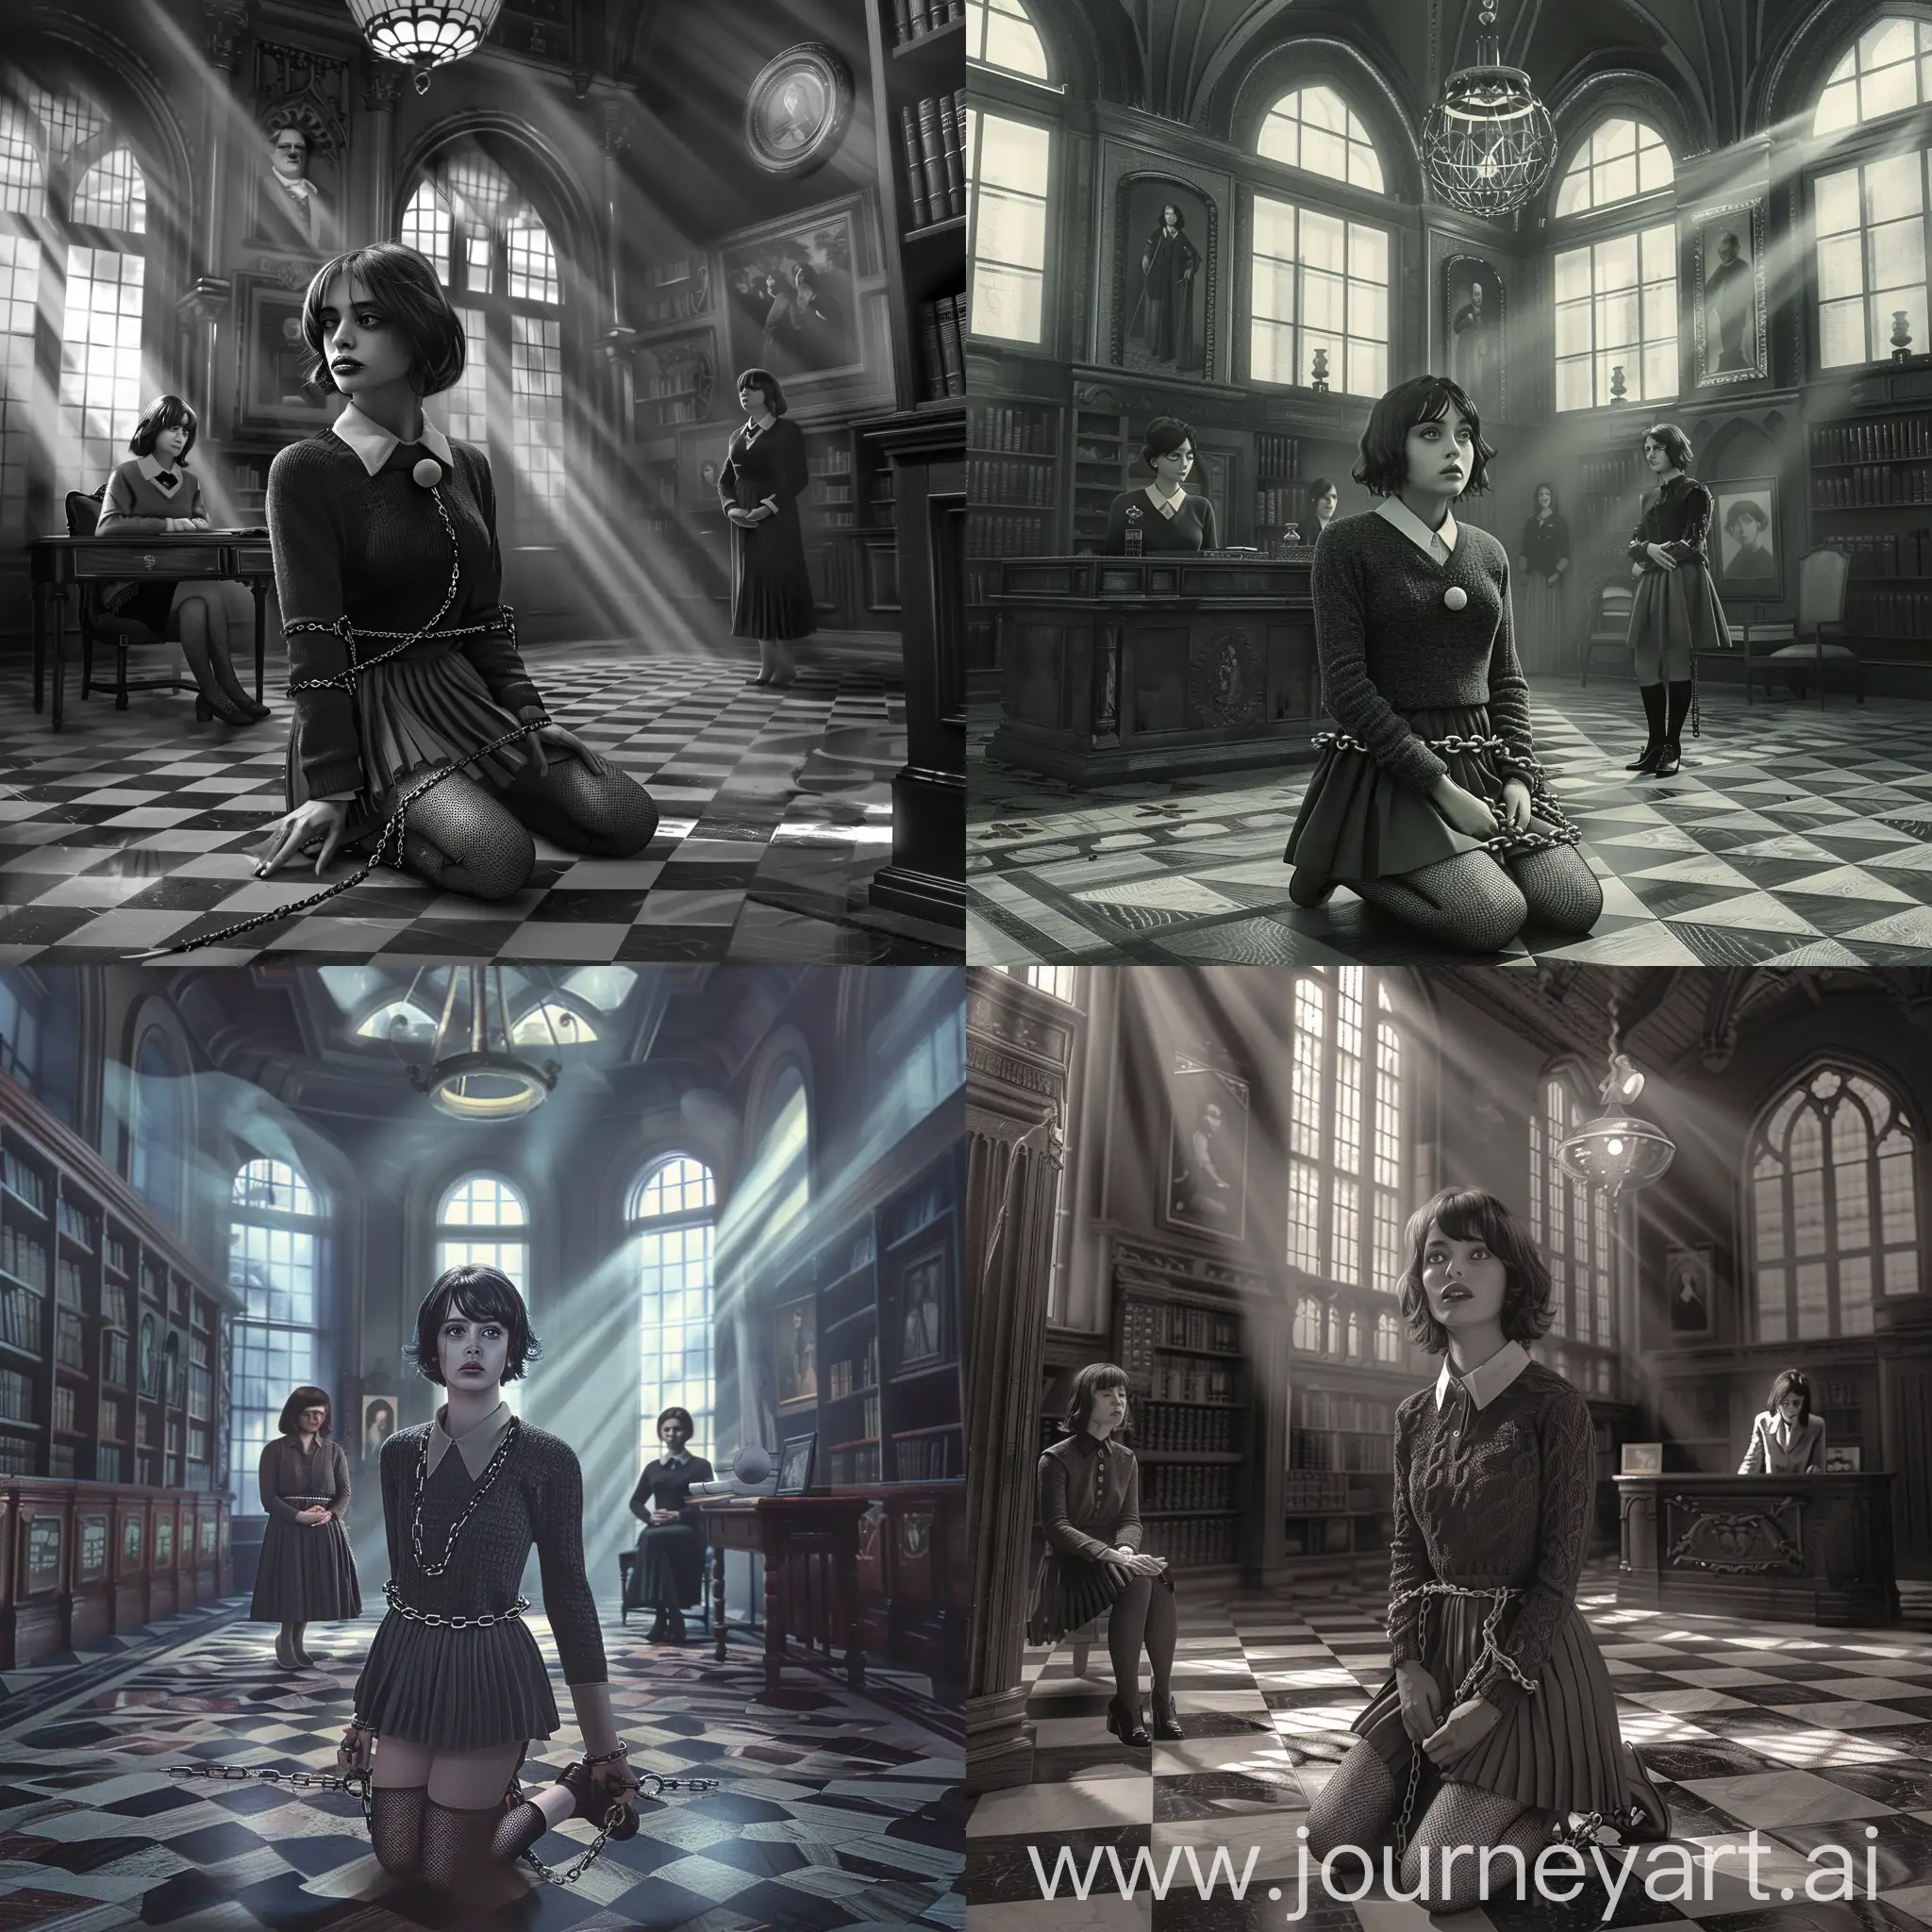 Create a dark, atmospheric scenario set in a grand, old-fashioned library with large arched windows allowing beams of light to filter through. The main subject is a young woman with short, dark hair. She is kneeling on a patterned, checkered floor, bound with chains and wearing a collar with a ball in mouth. Her attire includes a dark sweater over a collared shirt, paired with a pleated skirt and fishnet stockings. The scene should include two other women: one seated at an antique wooden desk, observing the bound woman with a neutral expression, and the other standing in the background with an air of authority. The room is filled with bookshelves, portraits, and an Old English aesthetic to enhance the mysterious and somewhat eerie ambiance. Capture the tension and dramatic lighting to emphasize the emotional gravity of the situation.